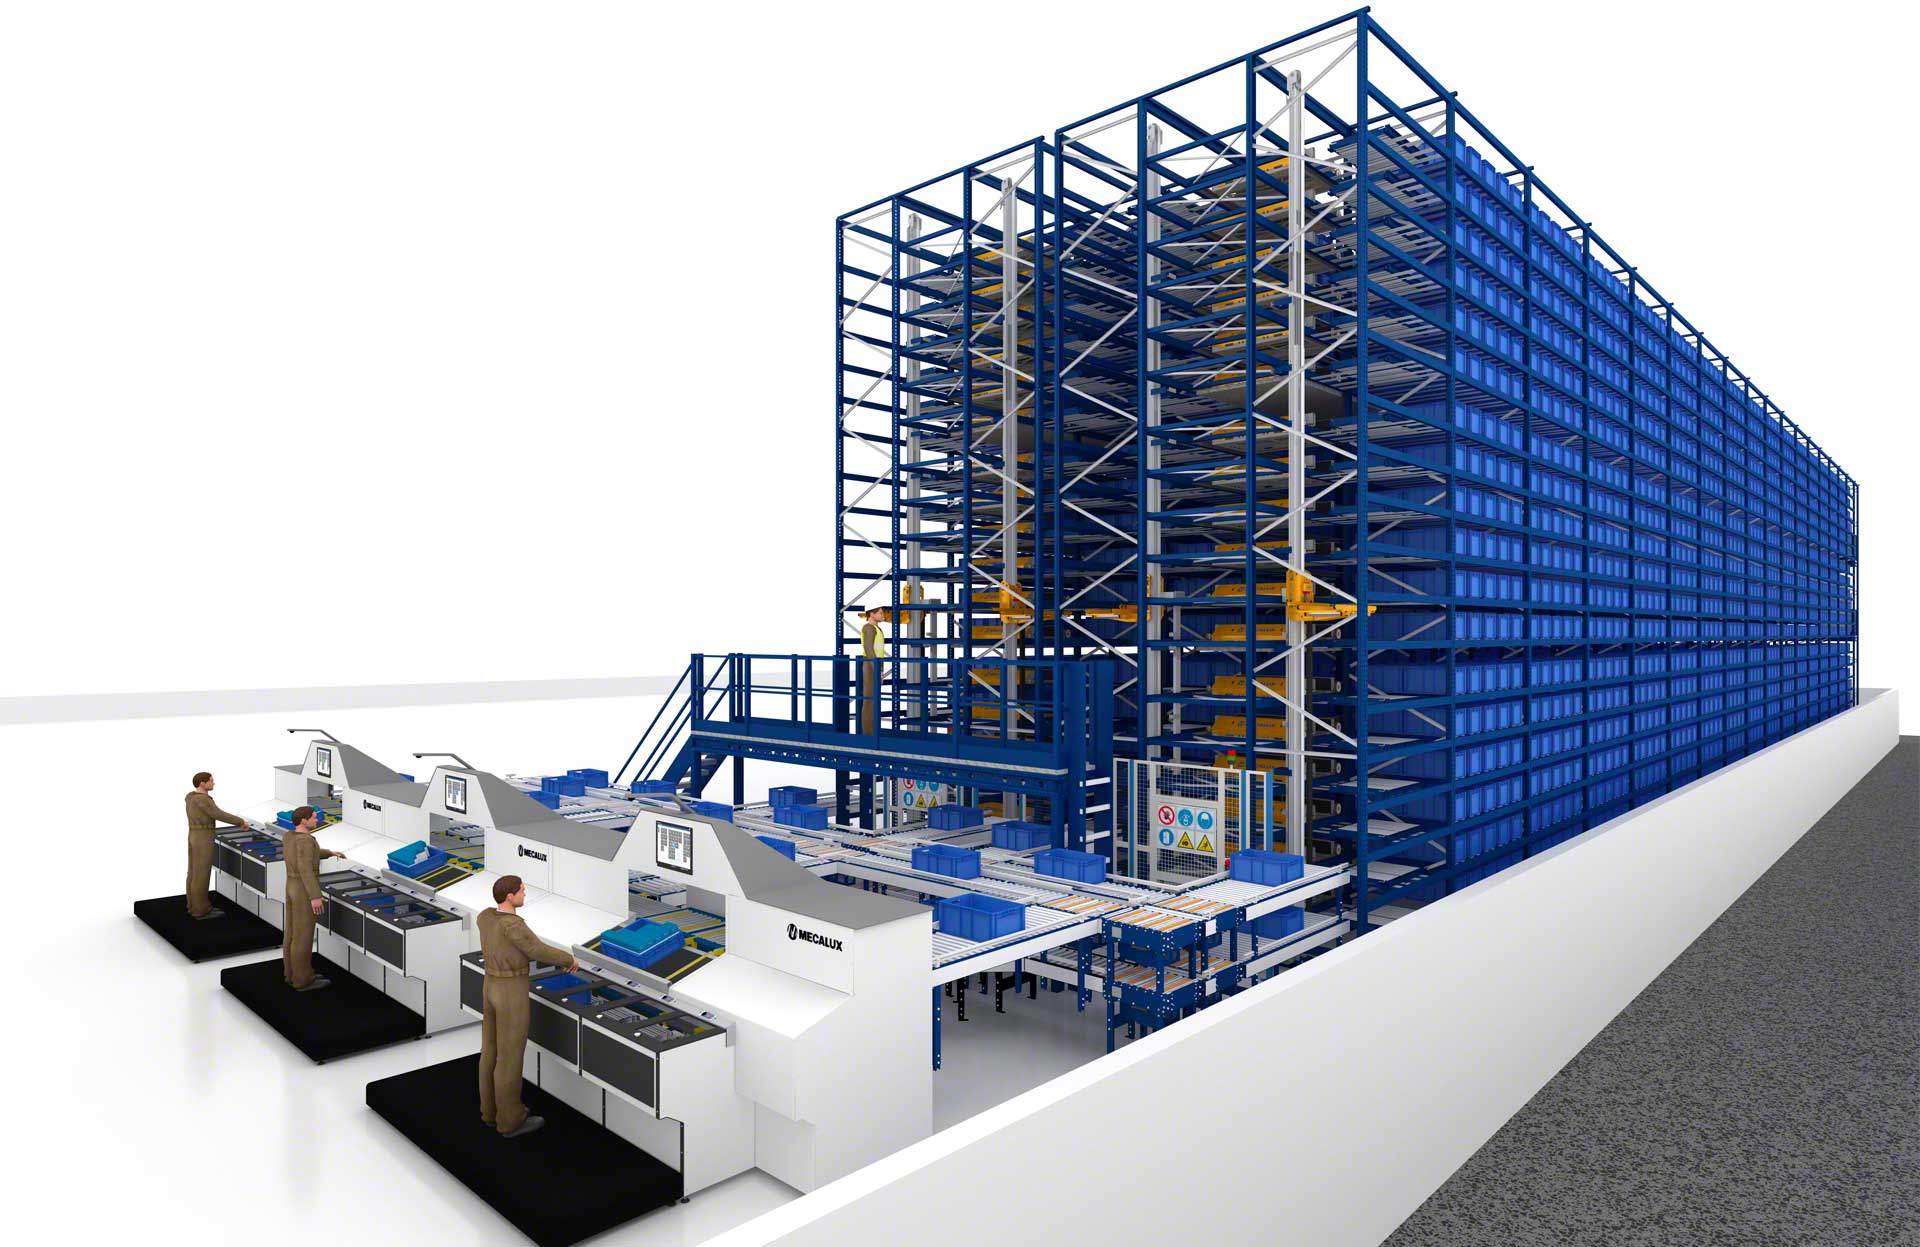 The high-performance pick station can be integrated with the Shuttle System to speed up order picking